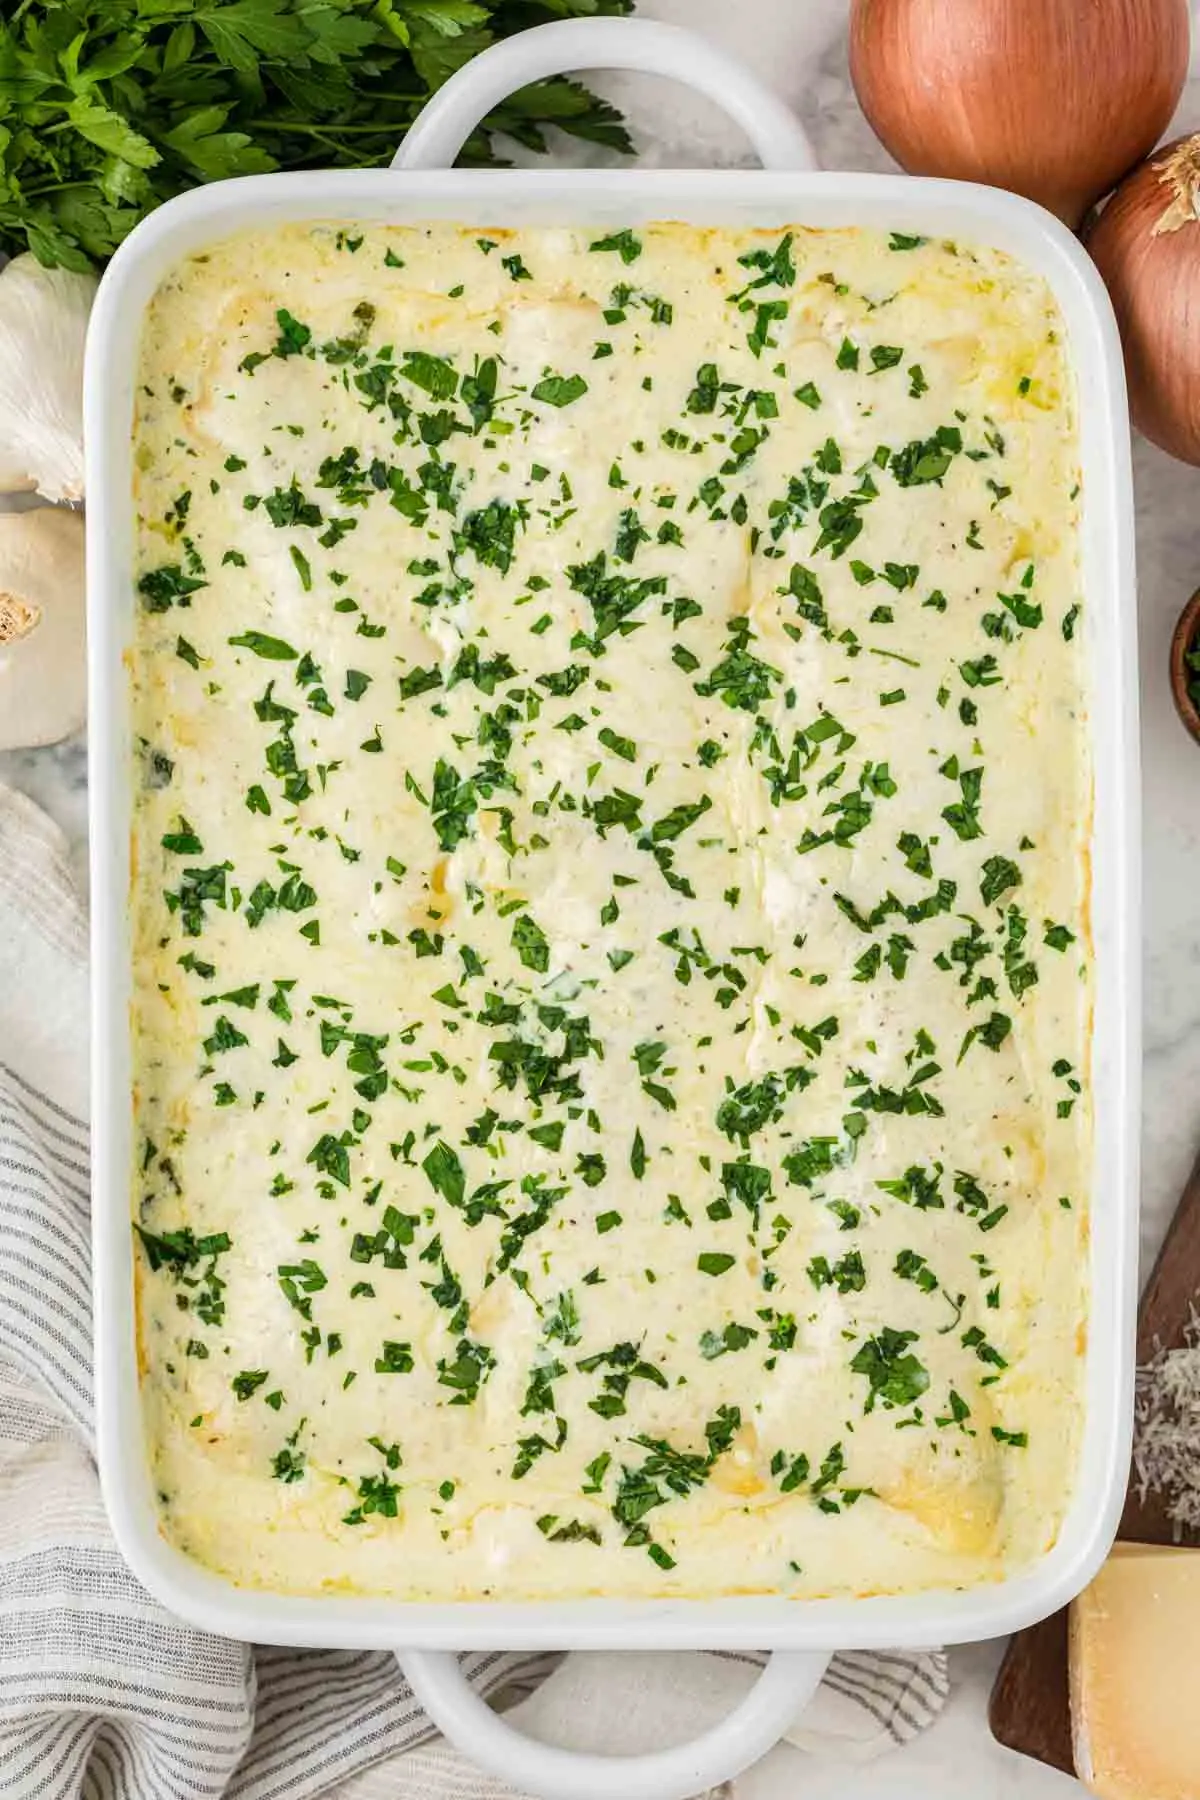 Chicken Alfredo Lasagna is a rich and delicious meal with layers of noodles, ricotta cheese, shredded chicken, mozzarella, sautéed spinach and mushrooms and a creamy Alfredo sauce.